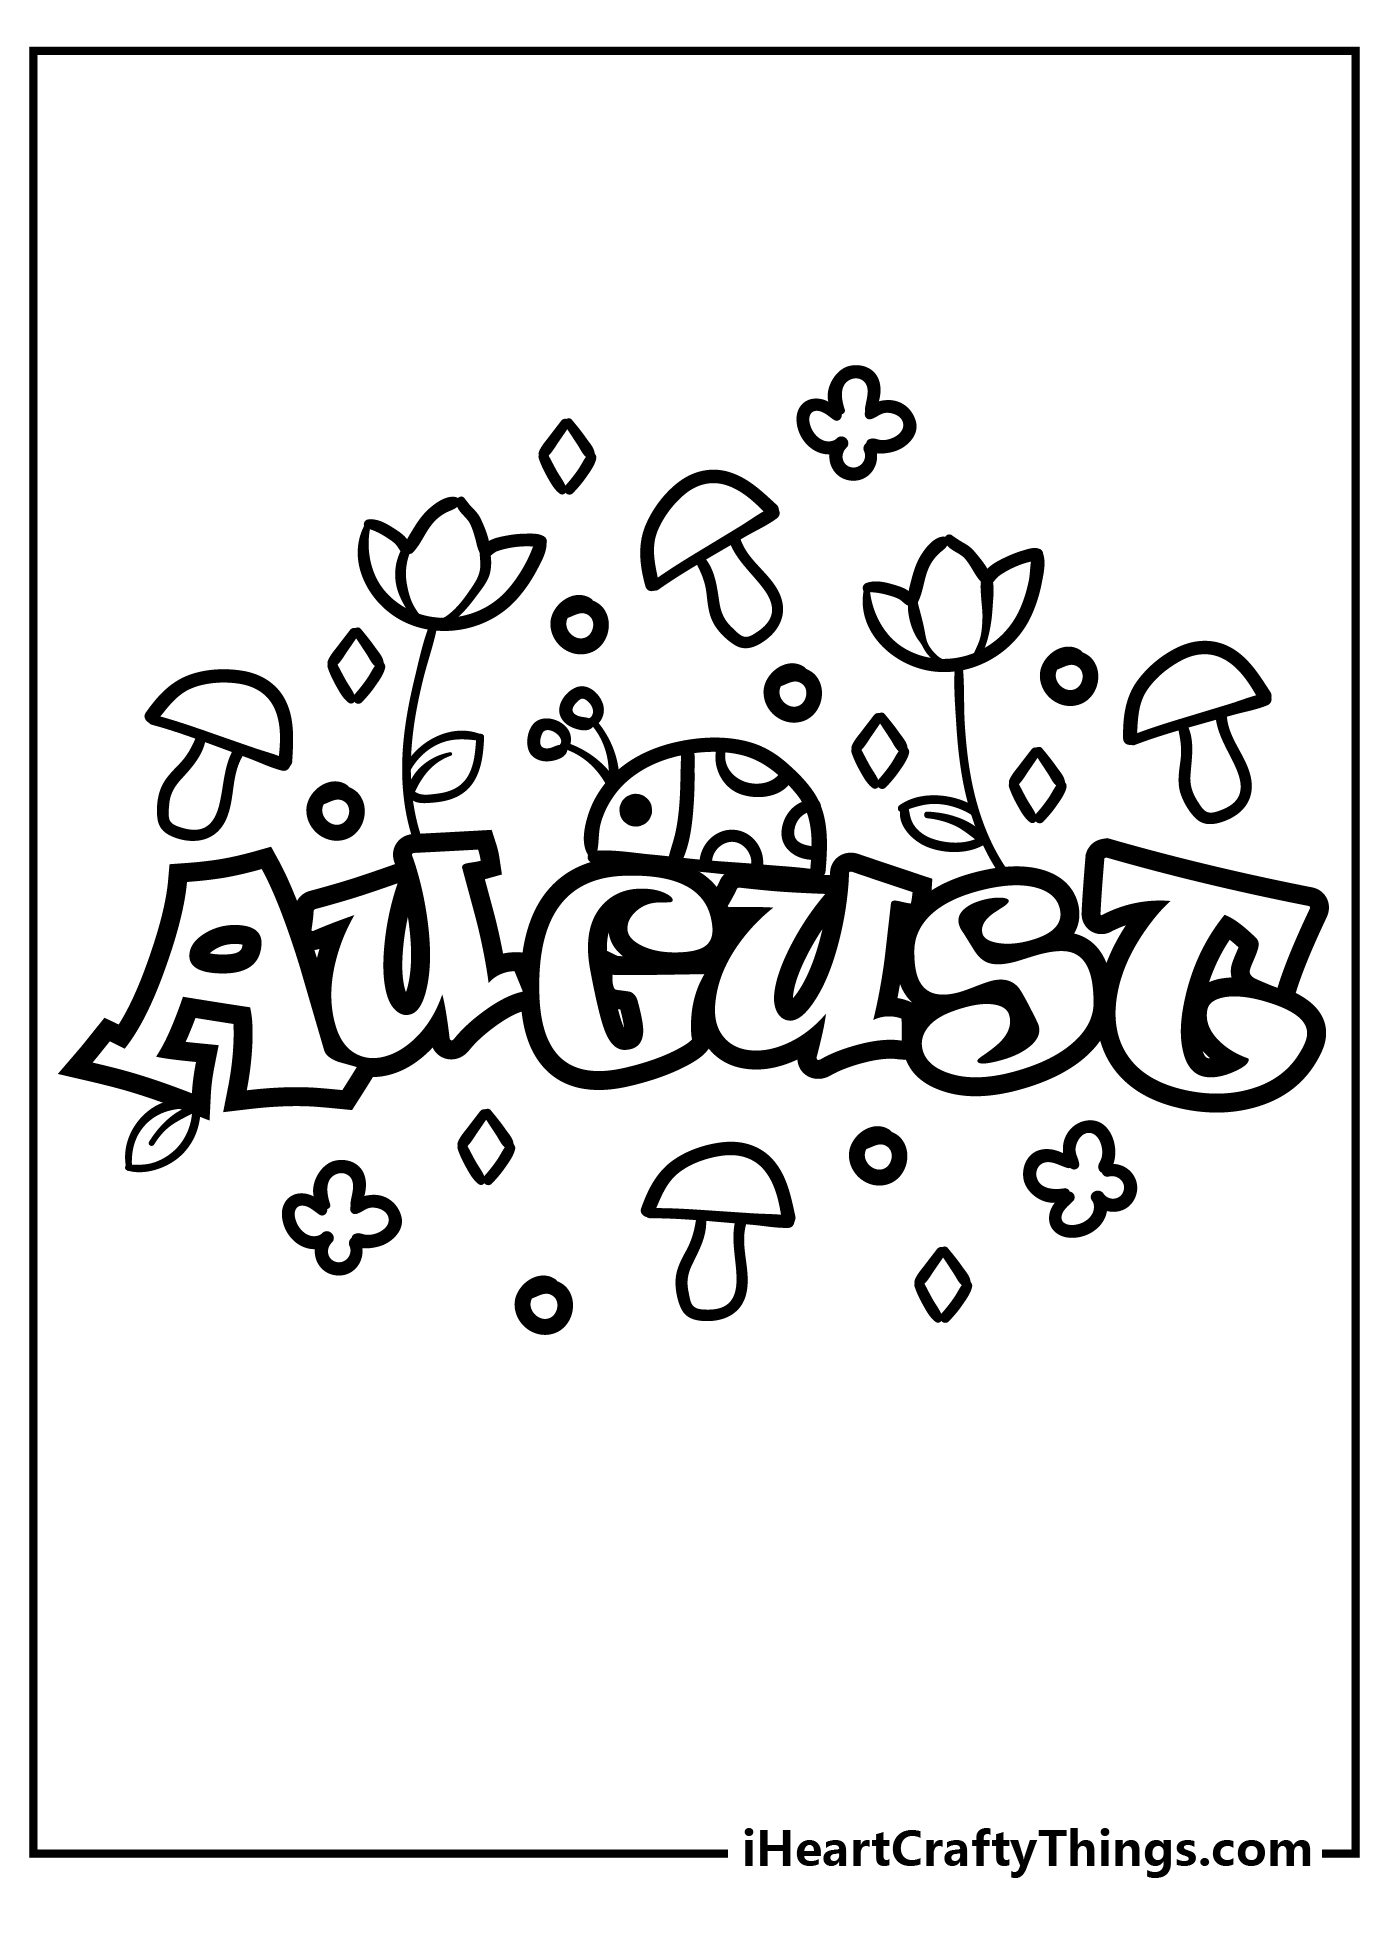 August coloring Book for adults free download